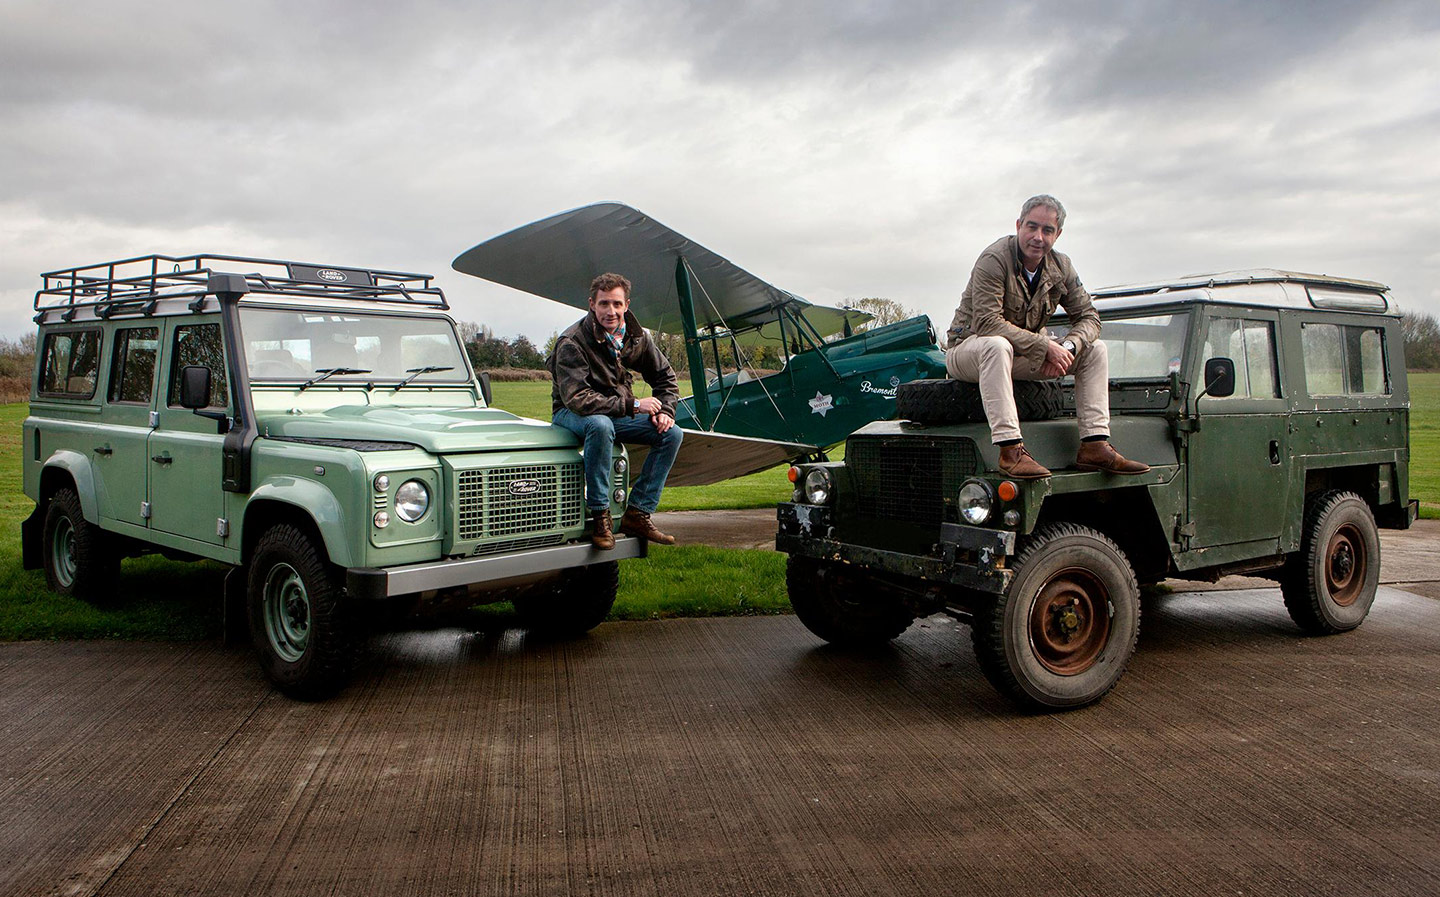 Me and My Motor: Nick and Giles English, founders of Bremont luxury watches